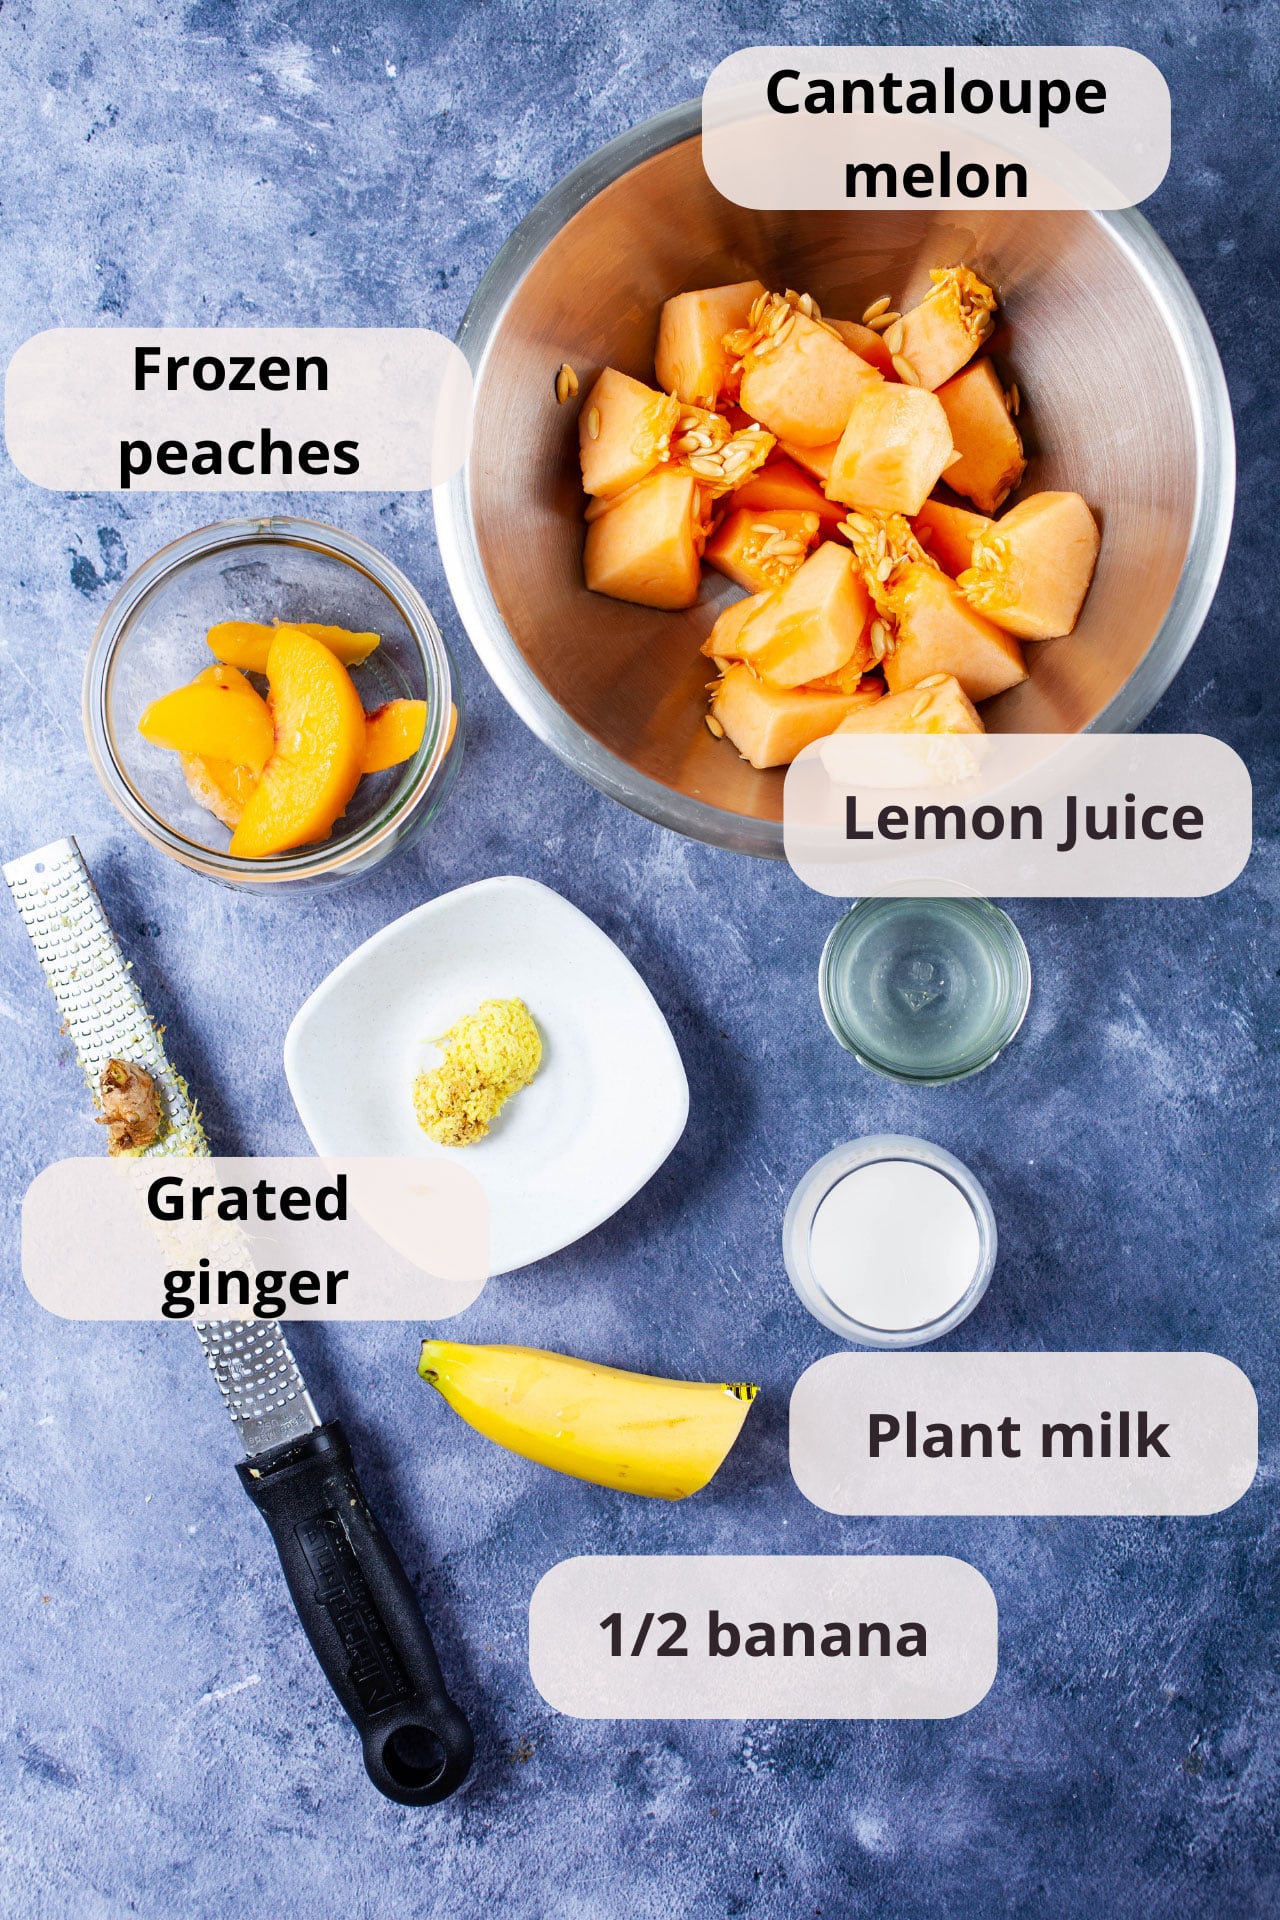 Cantaloupe melon, frozen peaches, lemon juice, grated ginger, plant milk, and half a banana displayed on a table.